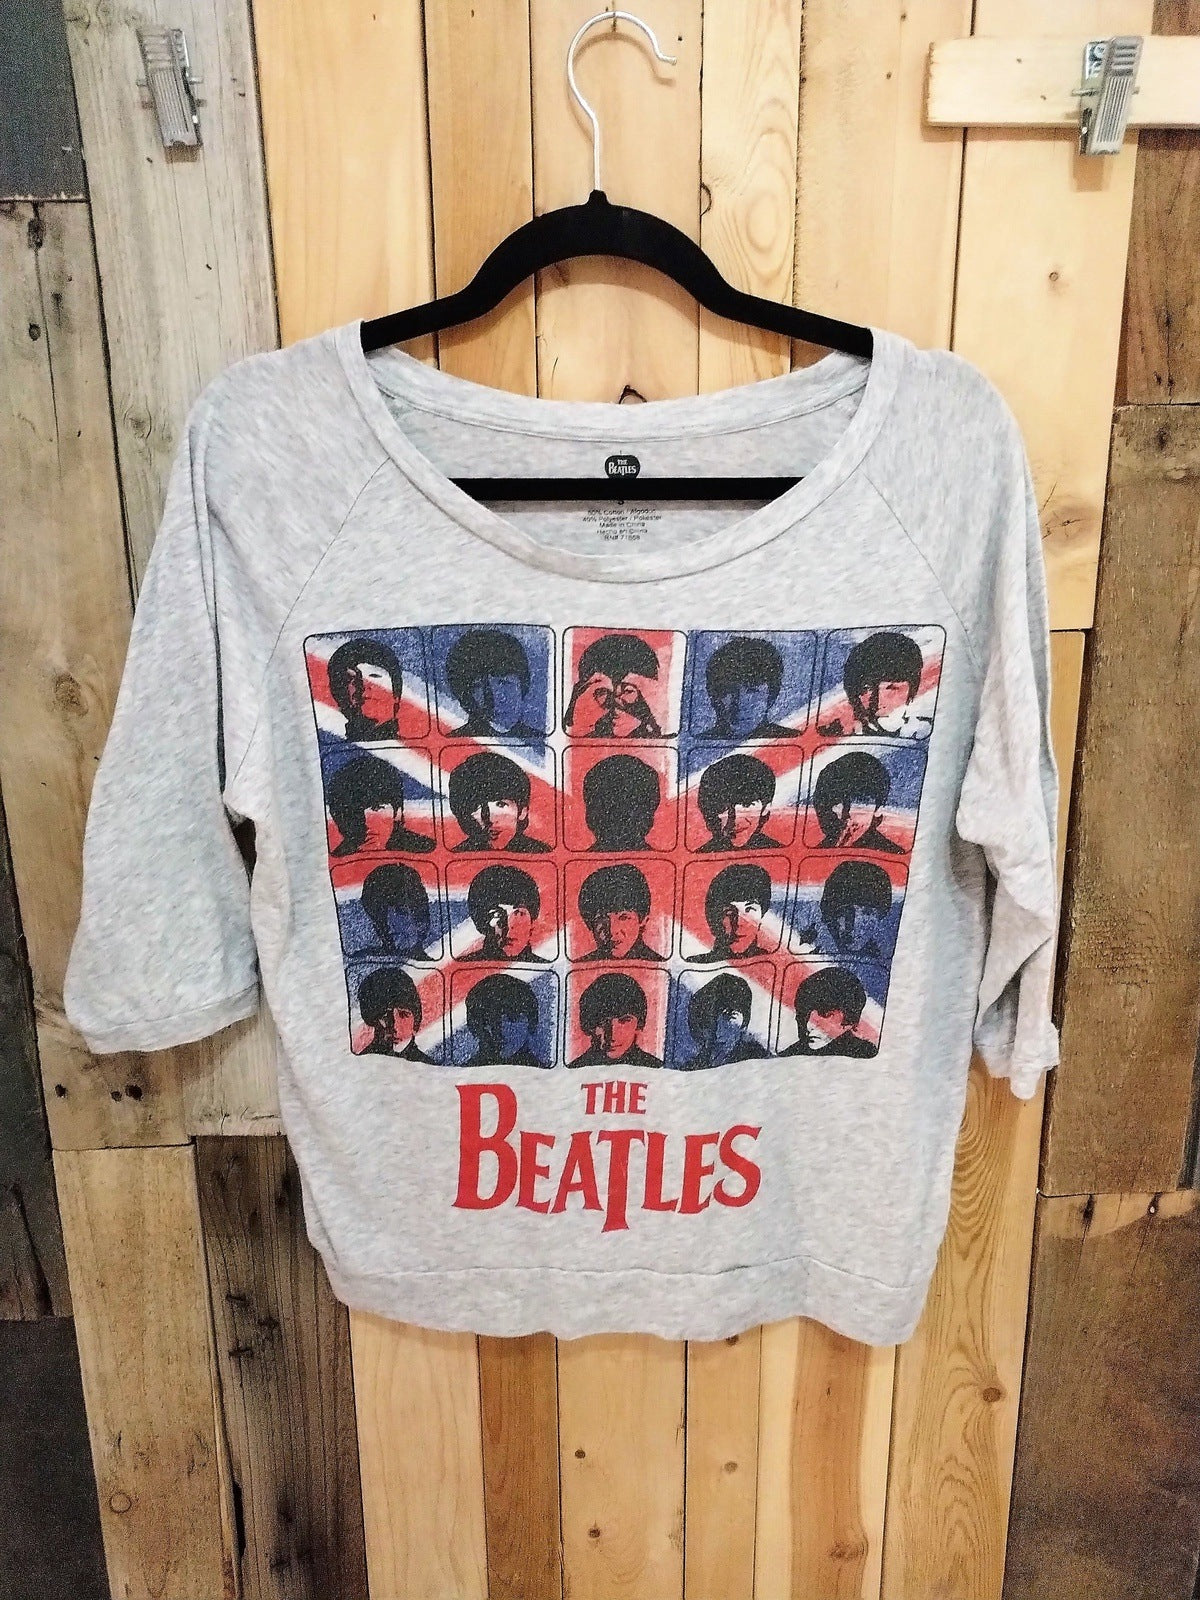 The Beatles Official Merchandise Women's T Shirt 3/4 Sleeve Size Small 379861WH